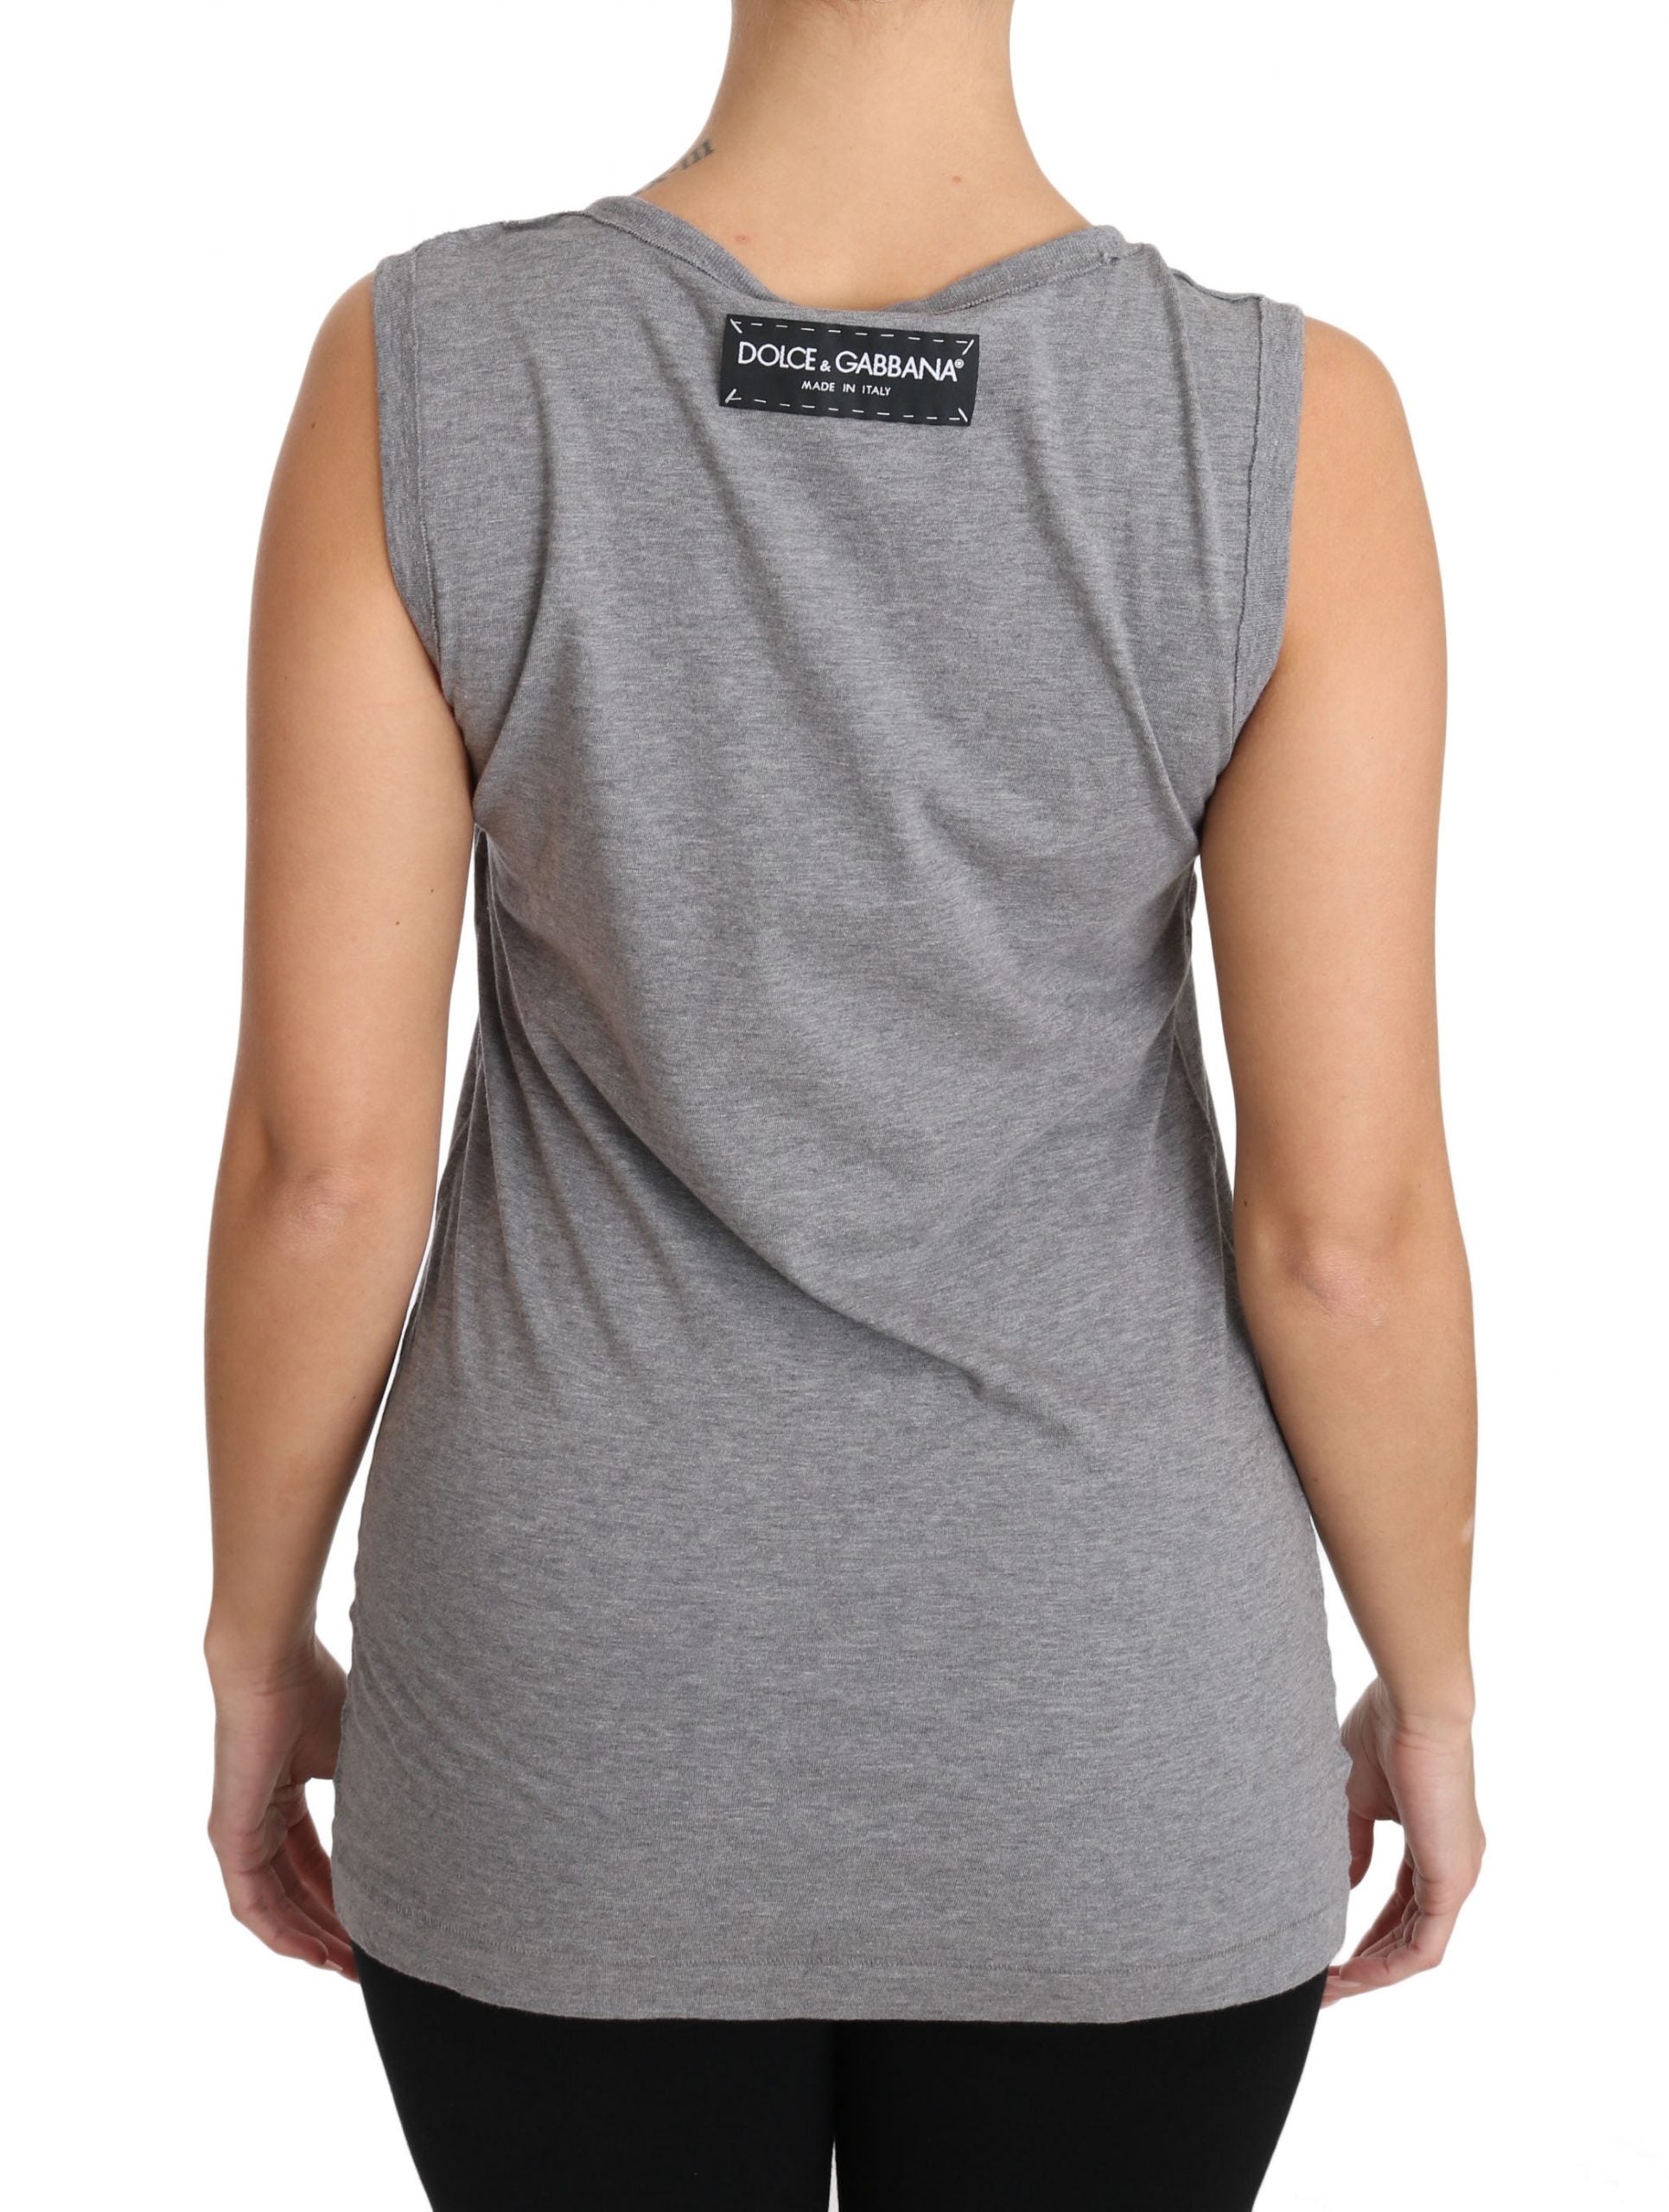 Buy Gray Tank Top Crystal Sequined Heart  T-shirt by Dolce & Gabbana